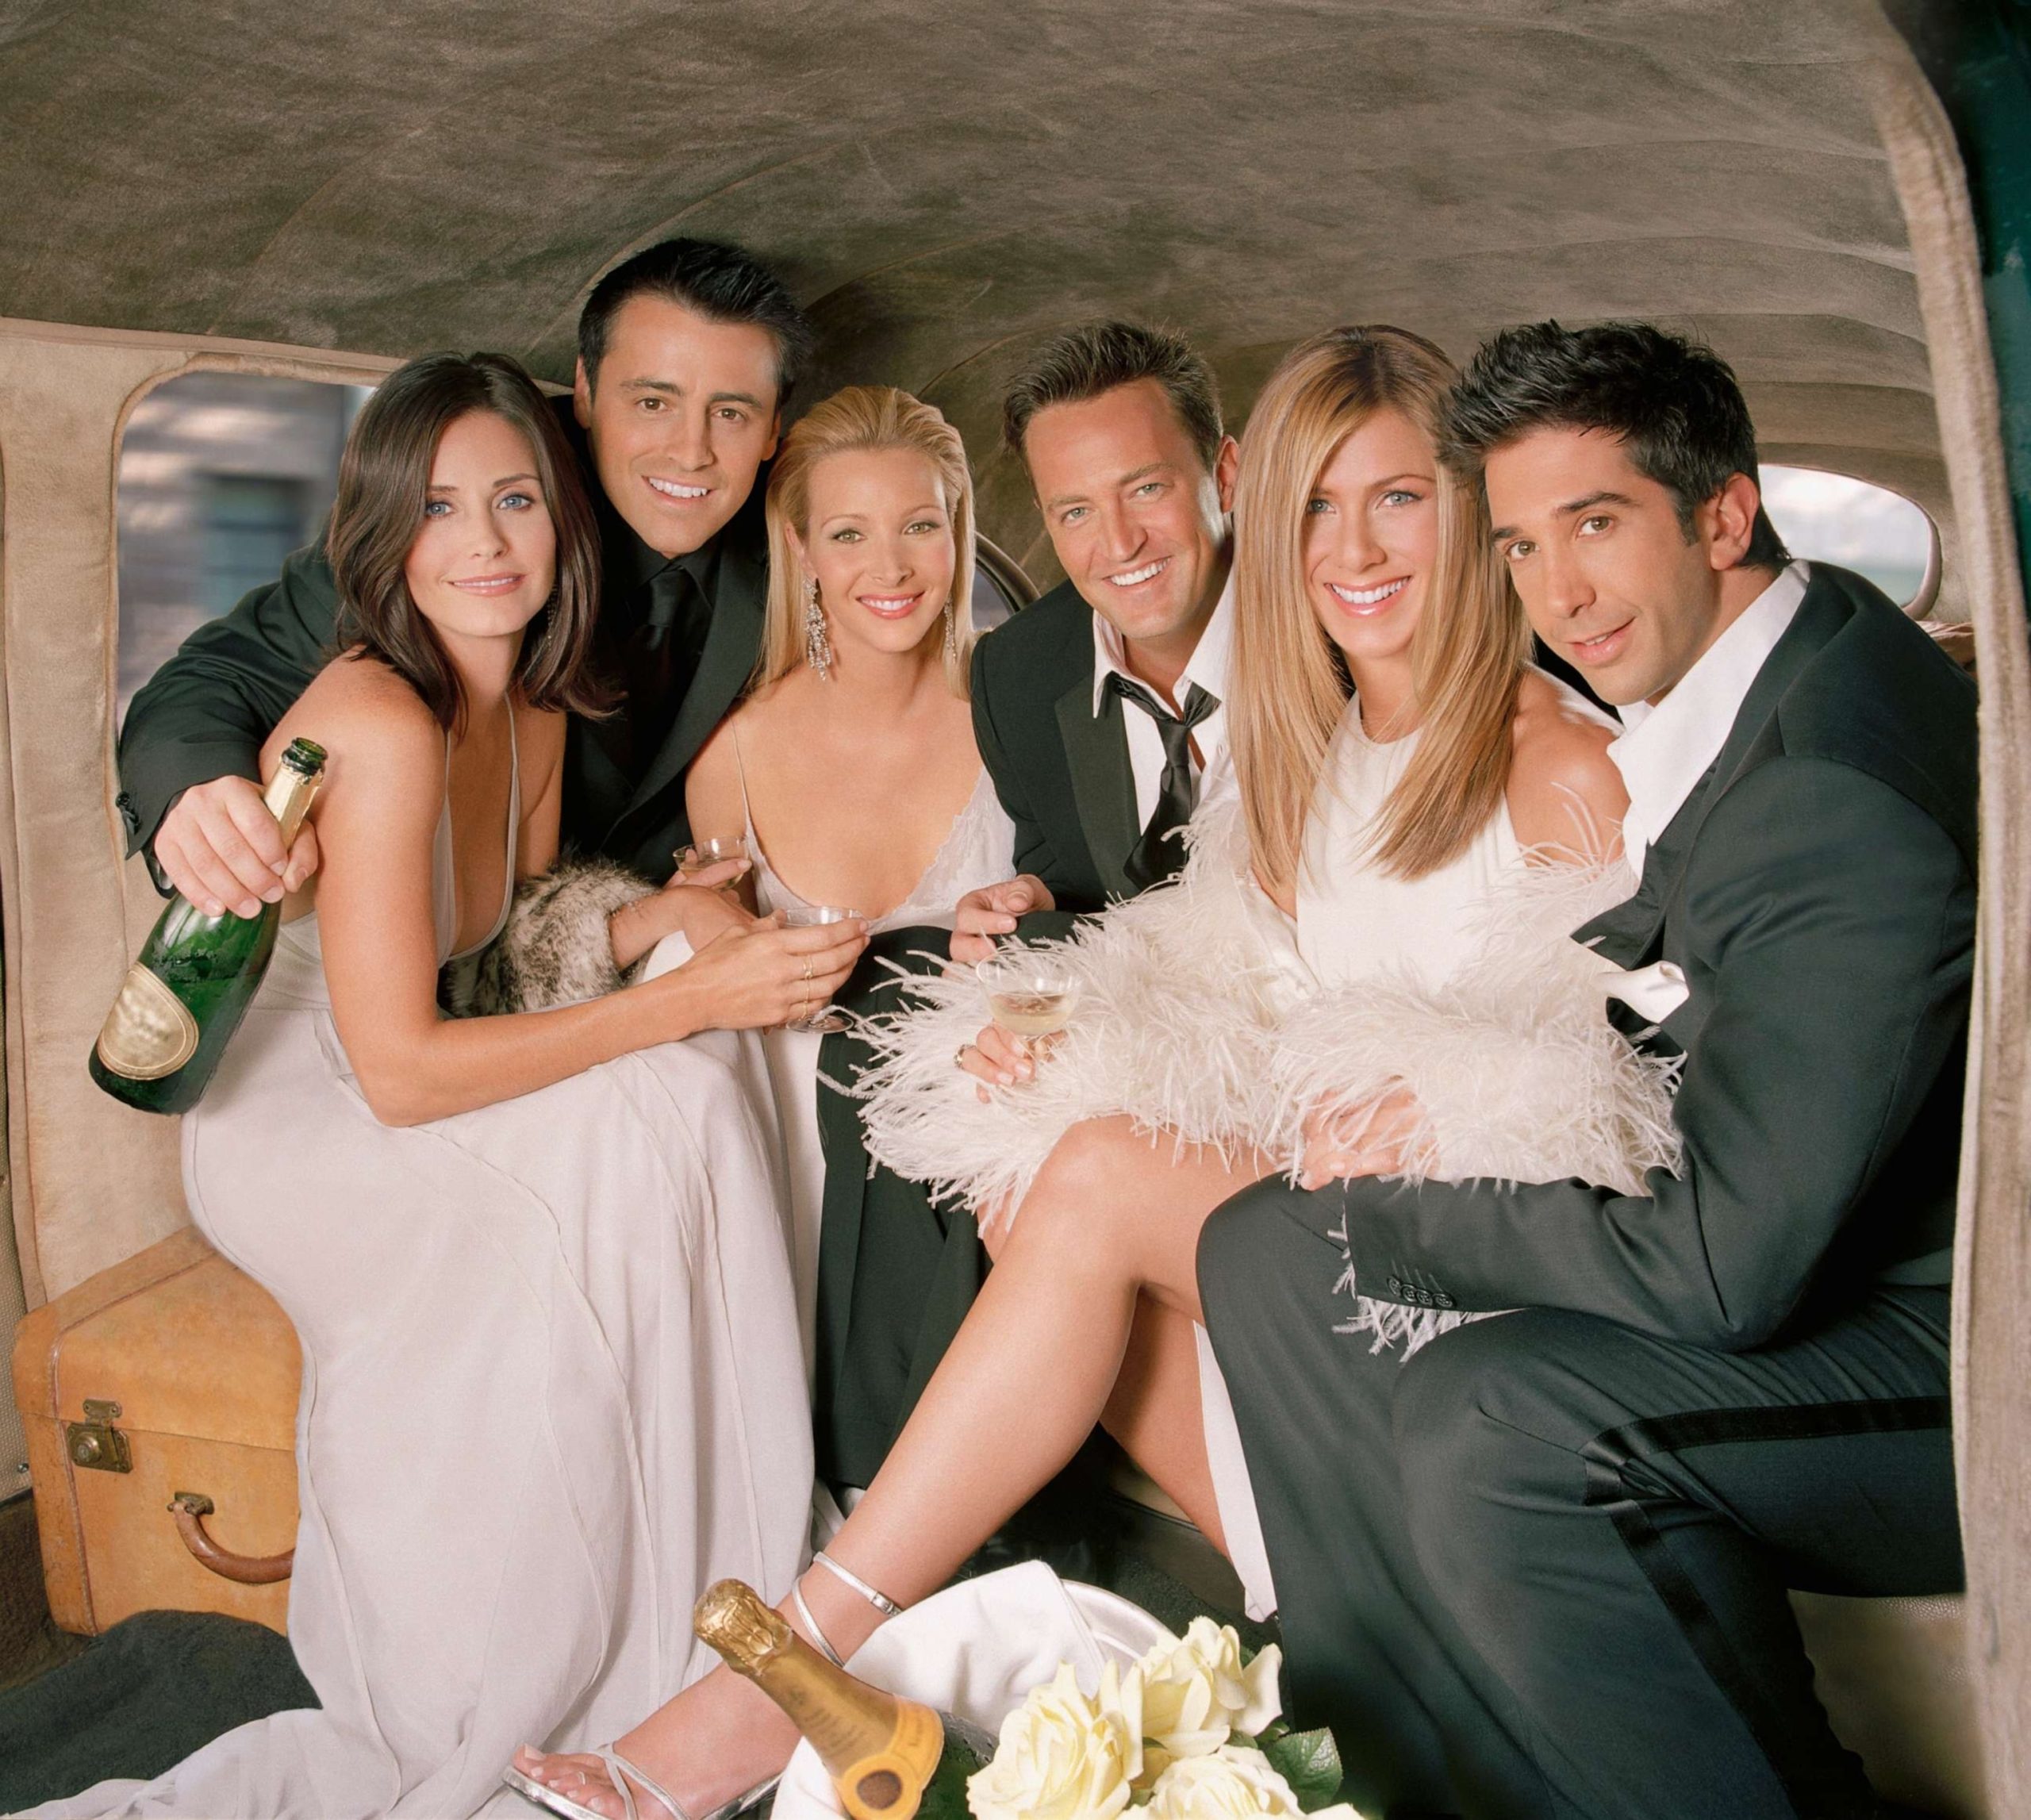 The 'Friends' Cast Issues a Joint Statement Paying Tribute to the Late Co-Star Matthew Perry